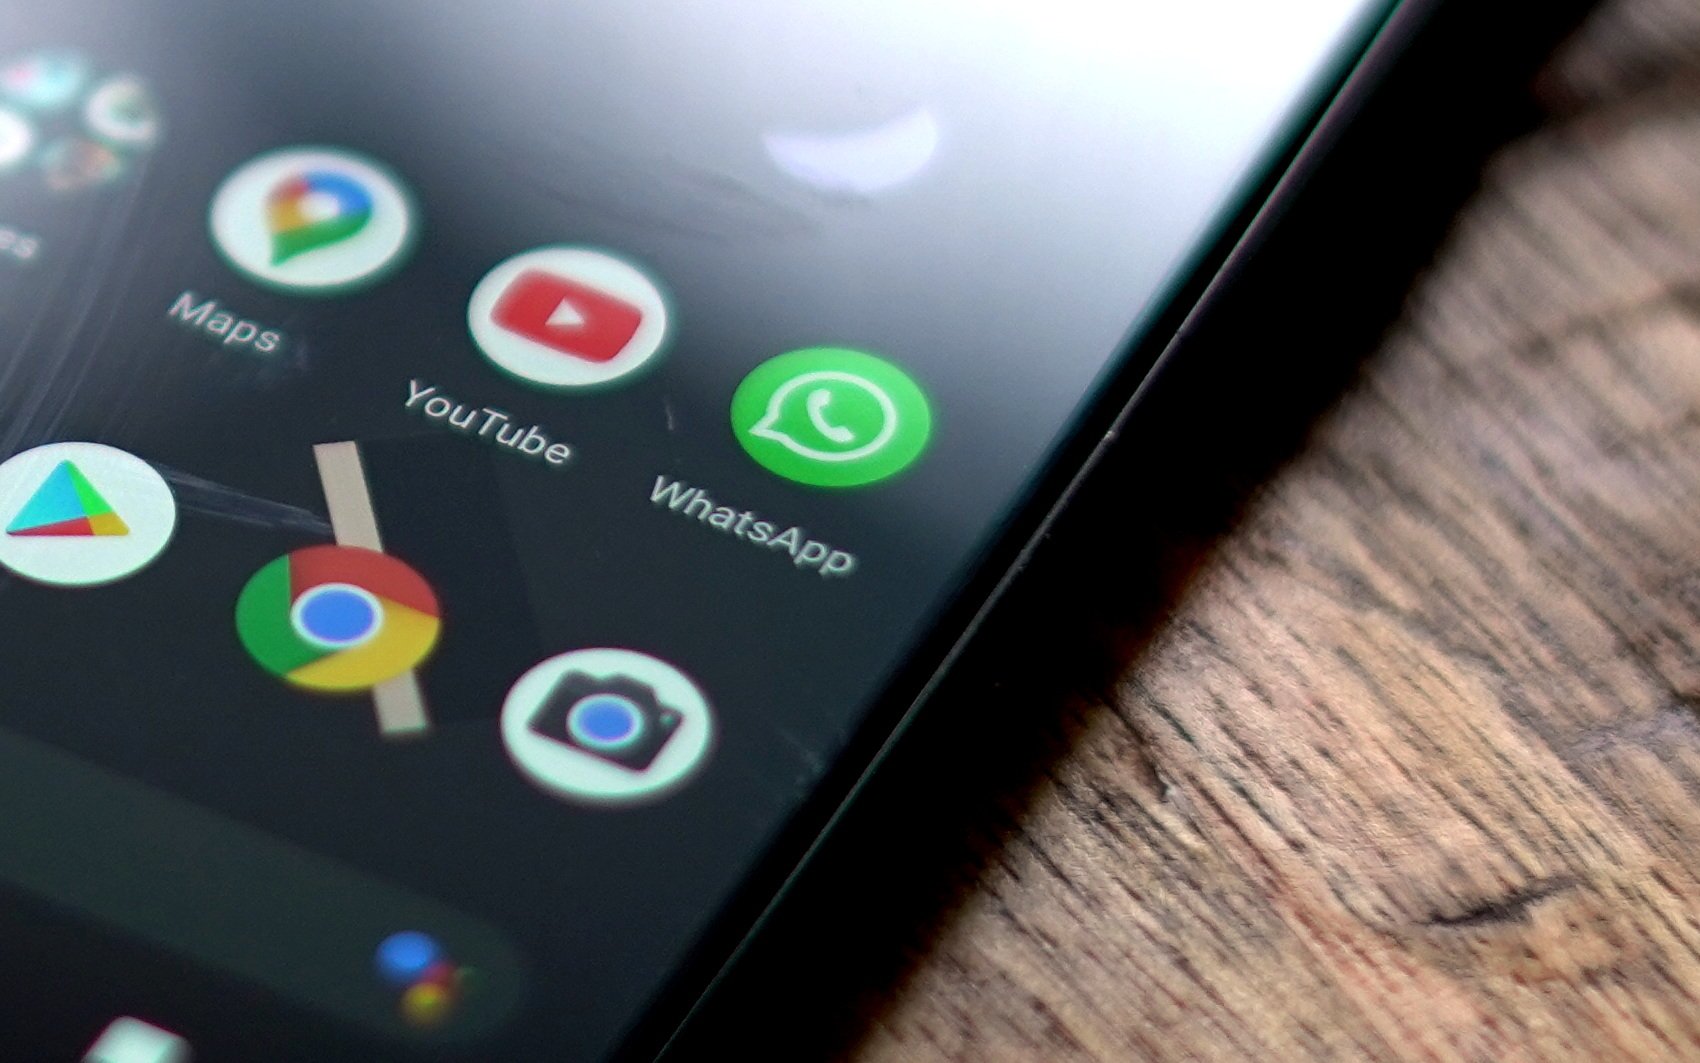 WhatsApp voice messages are about to get a handy transcription tool